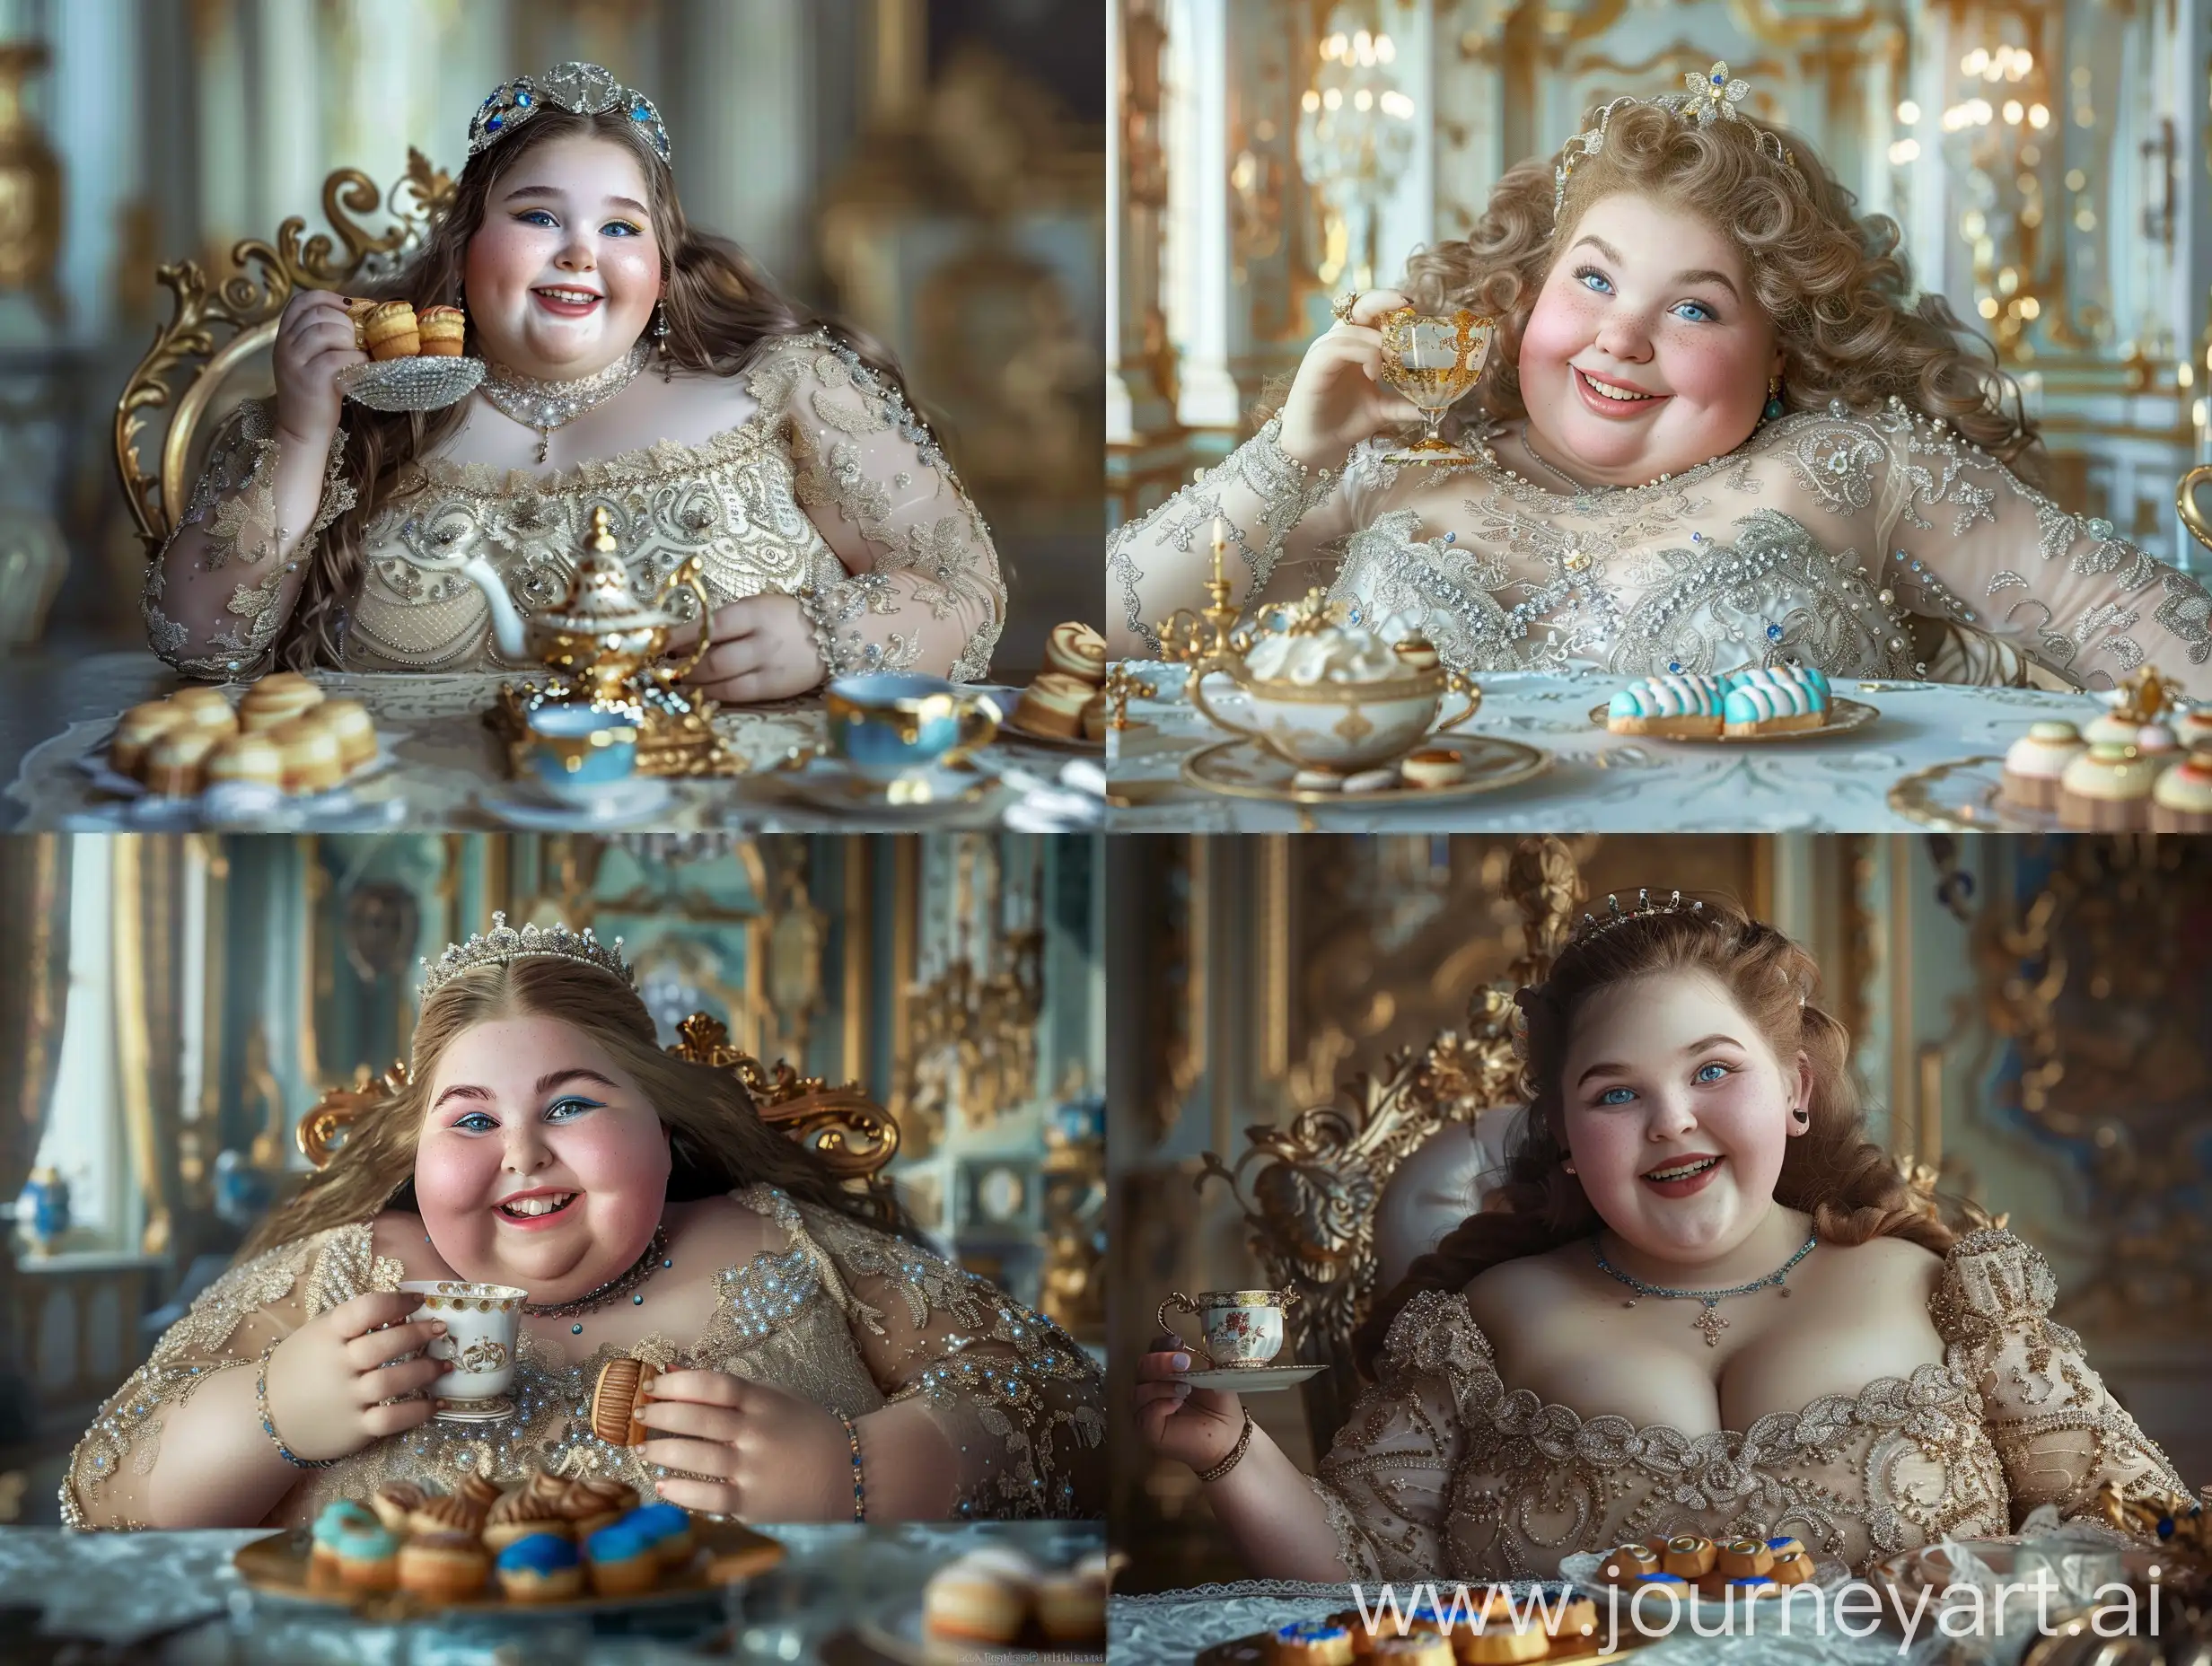 Stunningly-Beautiful-Obese-Teenage-Girl-Enjoying-Tea-and-Eclairs-in-Royal-Castle